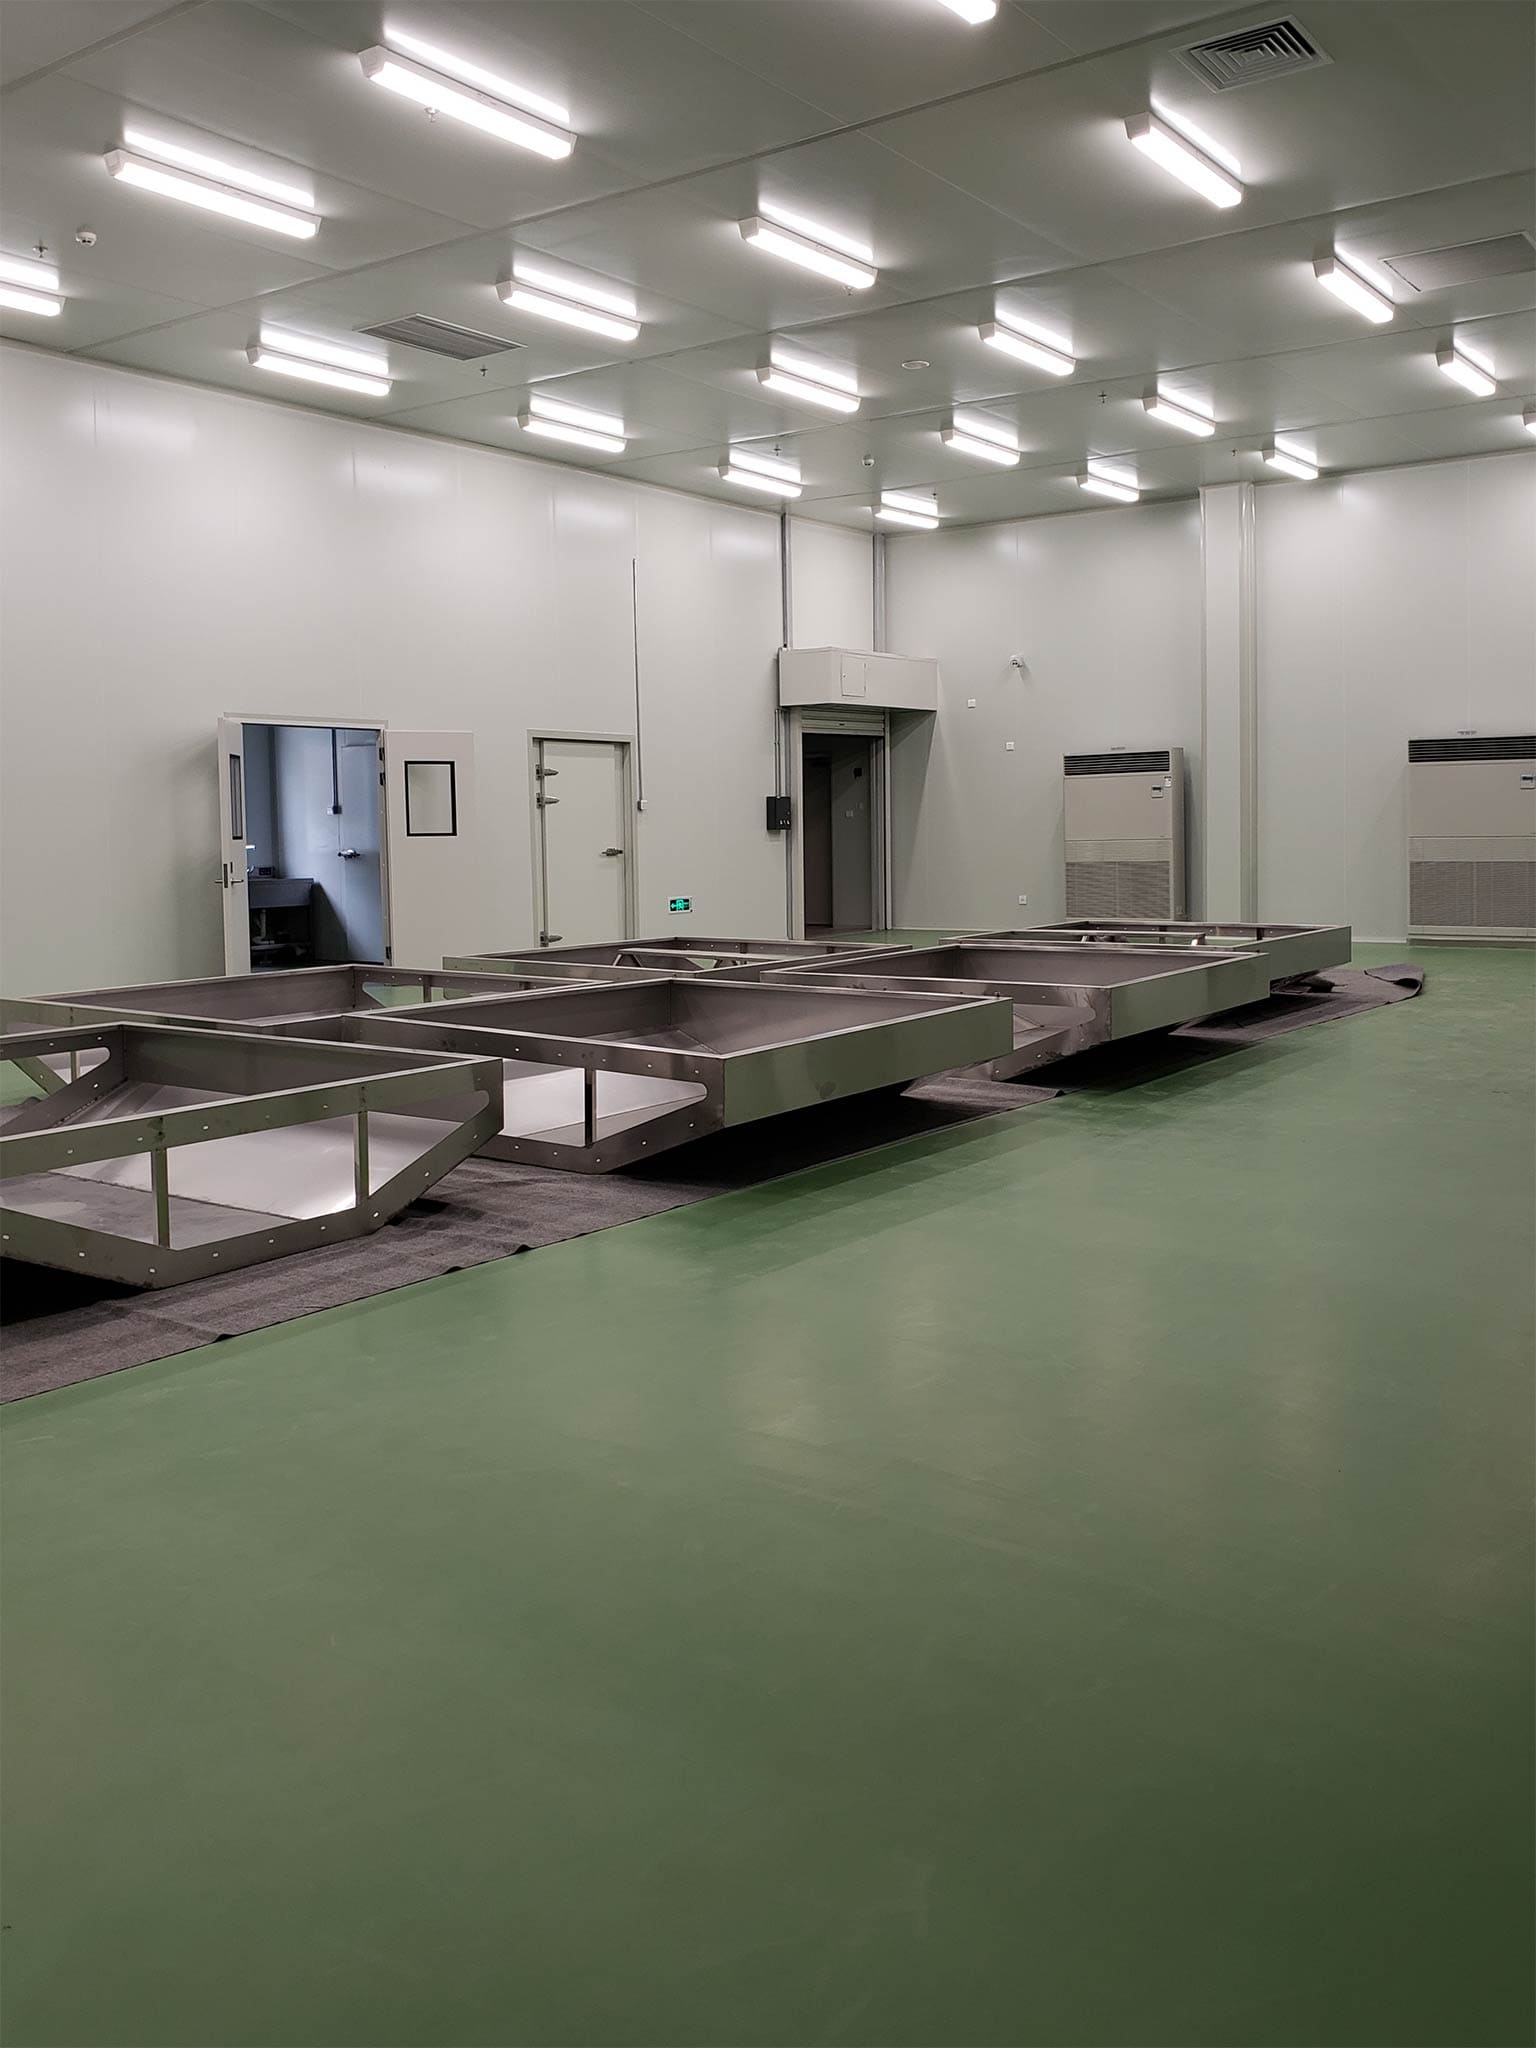 Green Urethane Modified Concrete Flooring in a factorynbspUrethane Concrete Flooring | Duraamen Engineered Products Inc | Duraamen Engineered Products Inc